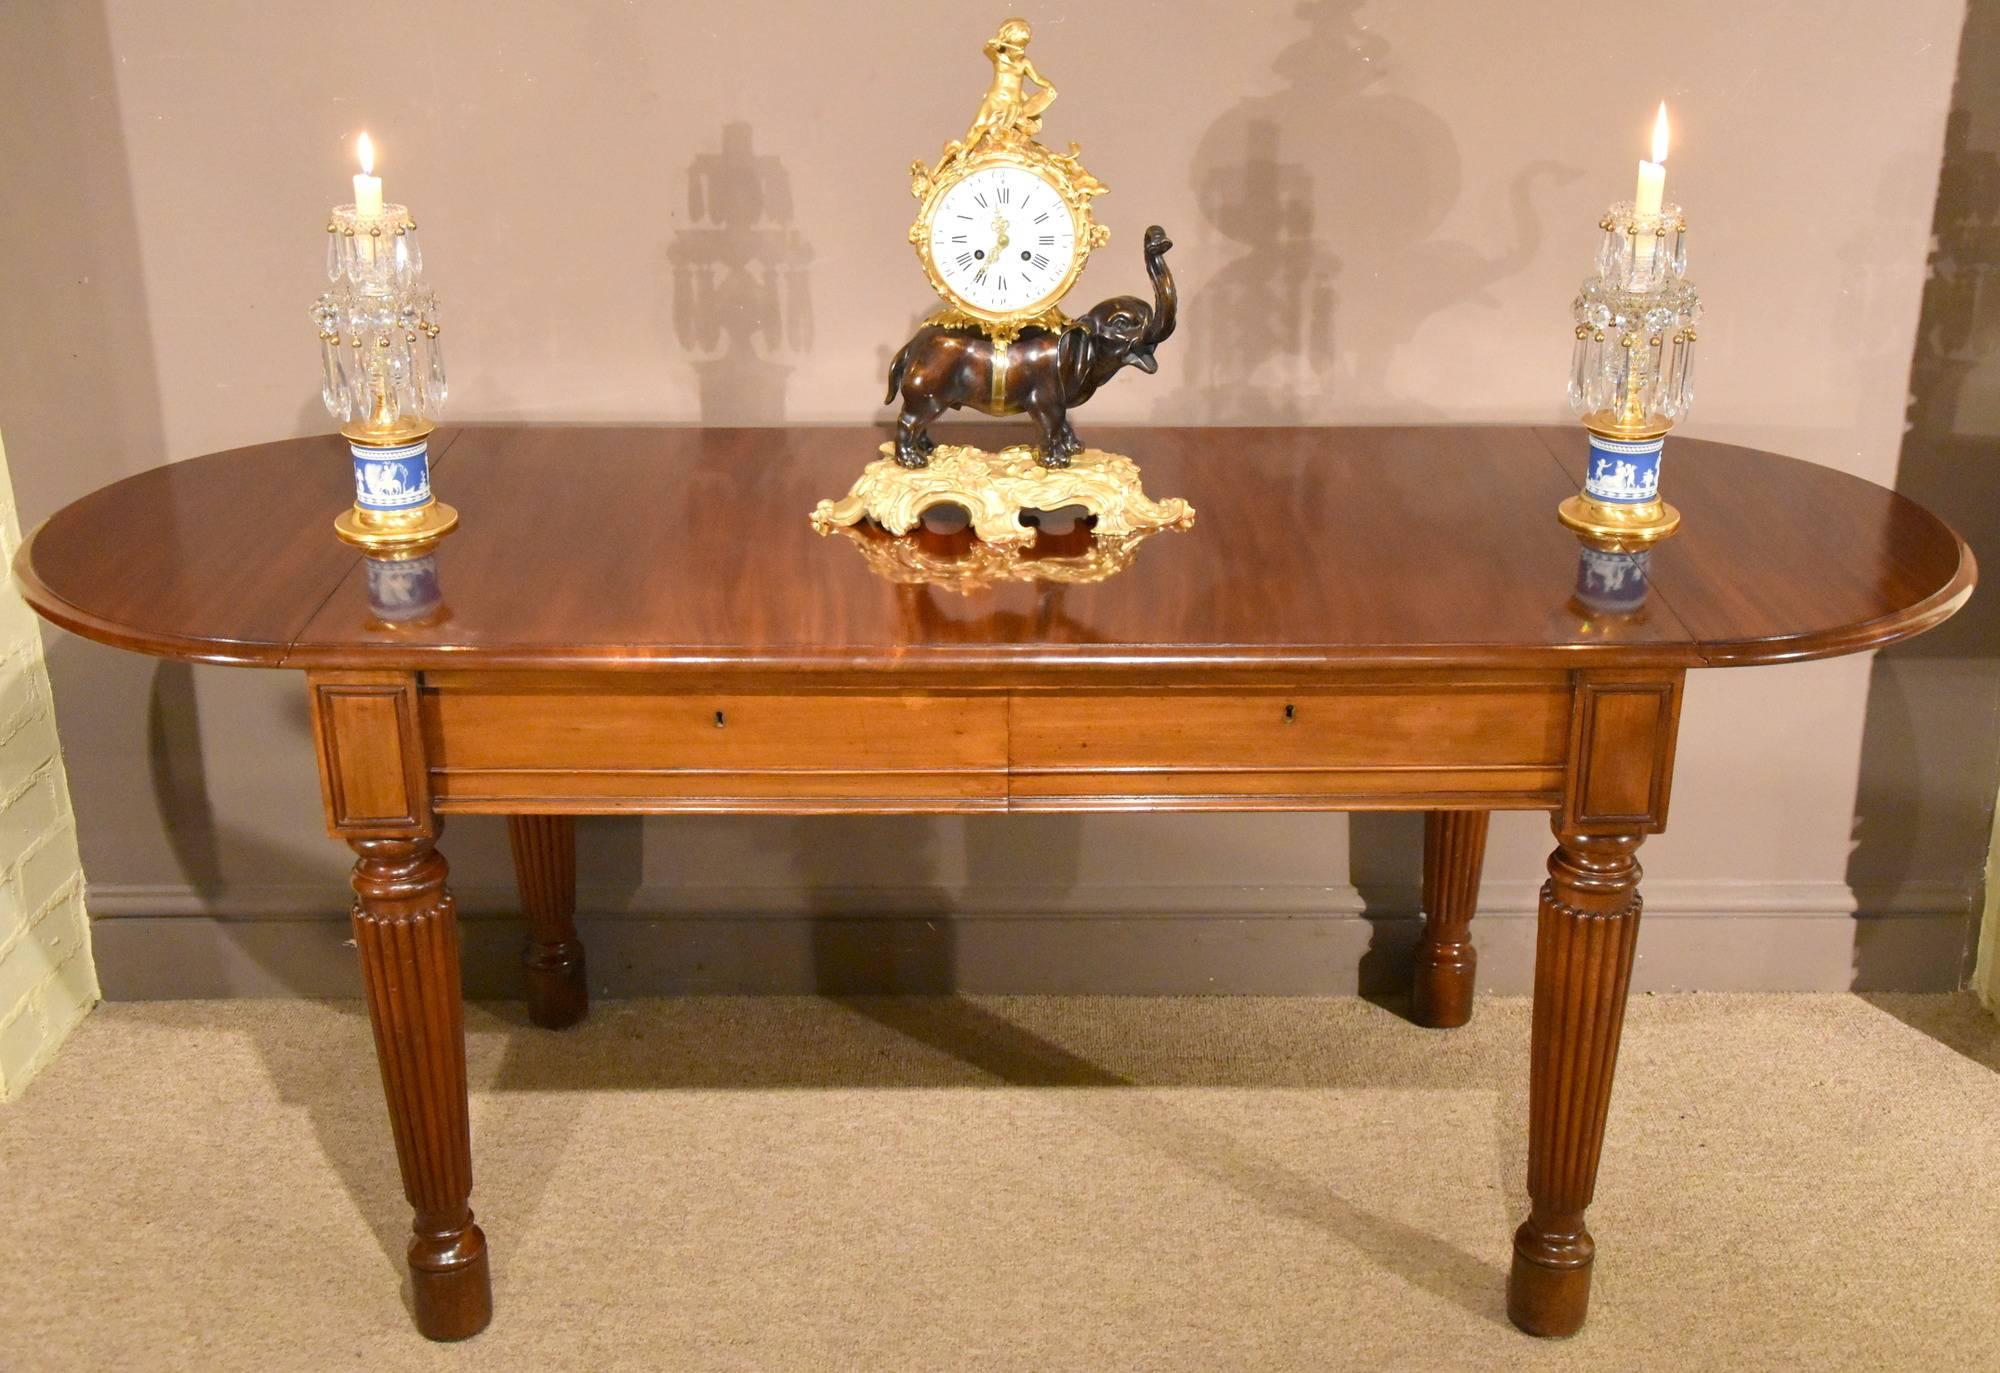 A very fine quality Regency period Gillow Lancaster sofa table. This piece has highly carved flaps supported on fluted legs and castors. The tow drawers with 4248 stamped underneath.

Dimensions:
Height 28.5